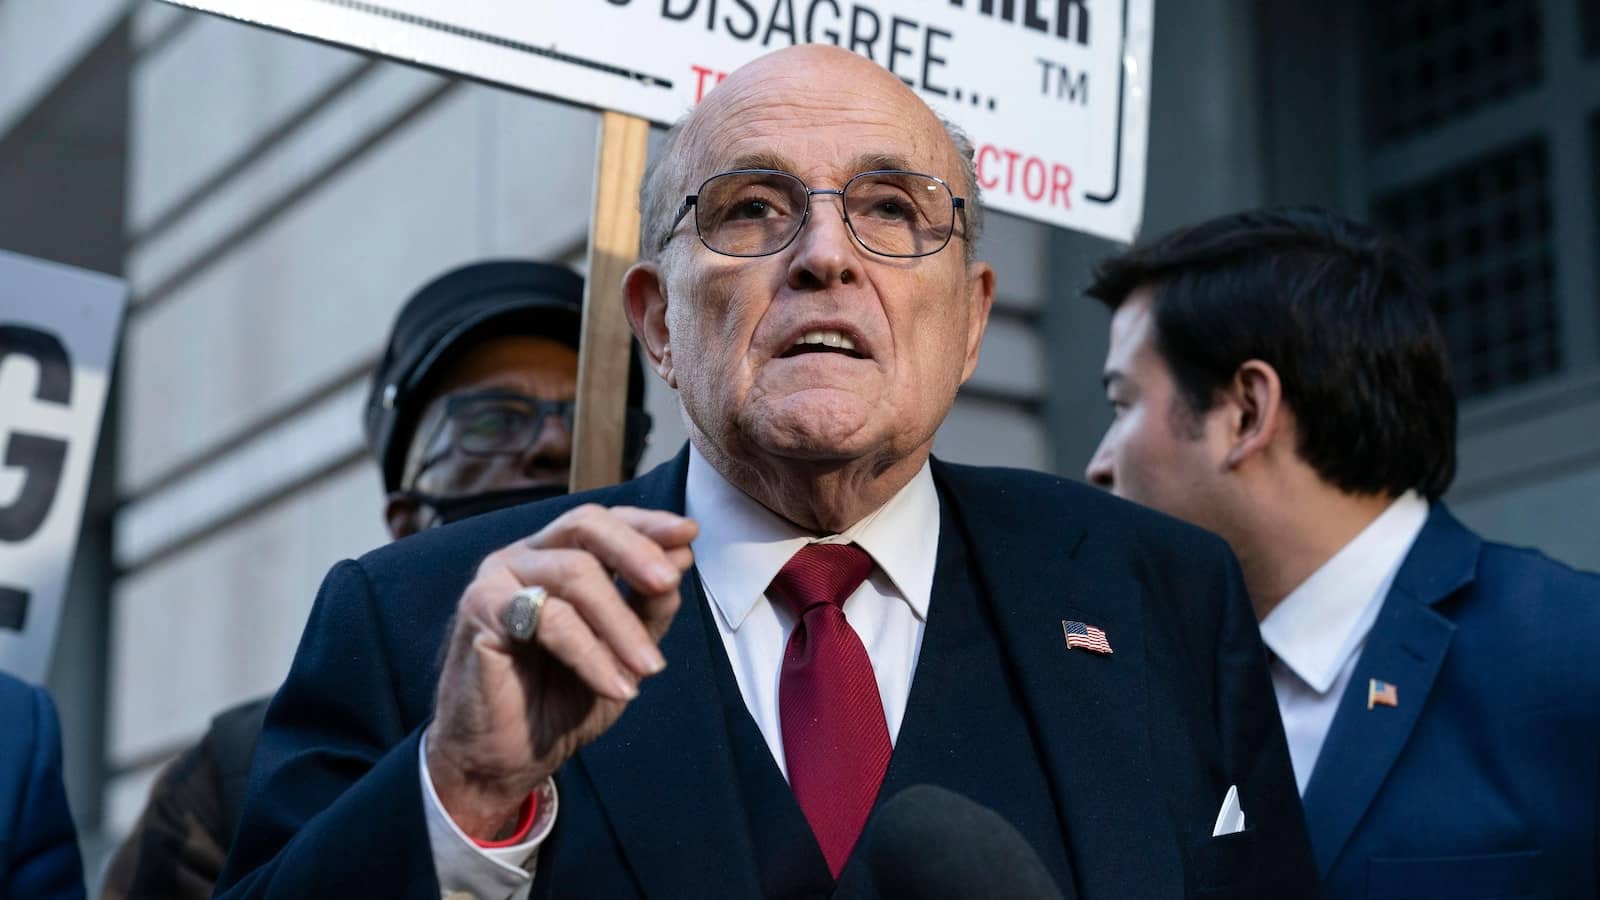 Giuliani bankruptcy judge frustrated with case, rebuffs attempt to challenge 8 million judgment